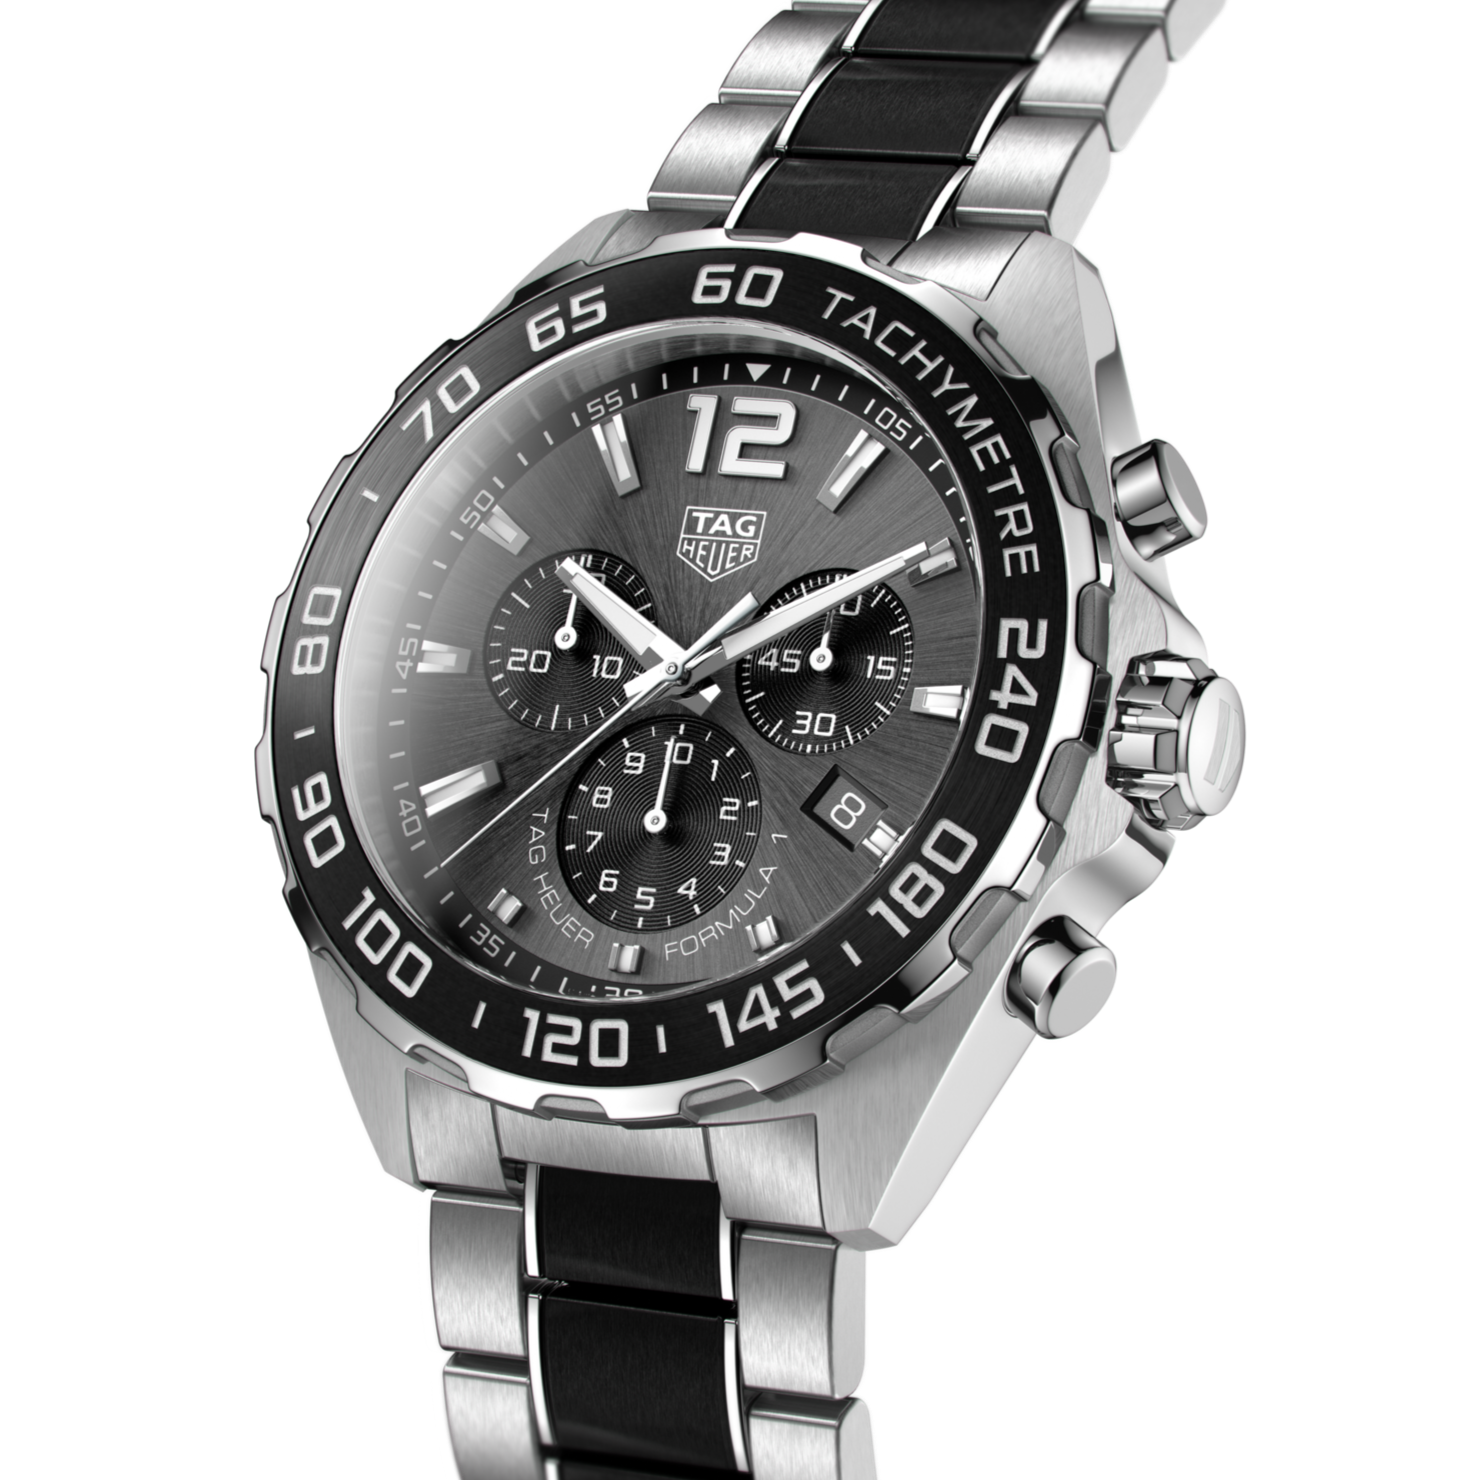 Tag Heuer Formula 1 Anthracite Dial Two Tone Steel Strap Watch For Men - CAZ1011.BA0843